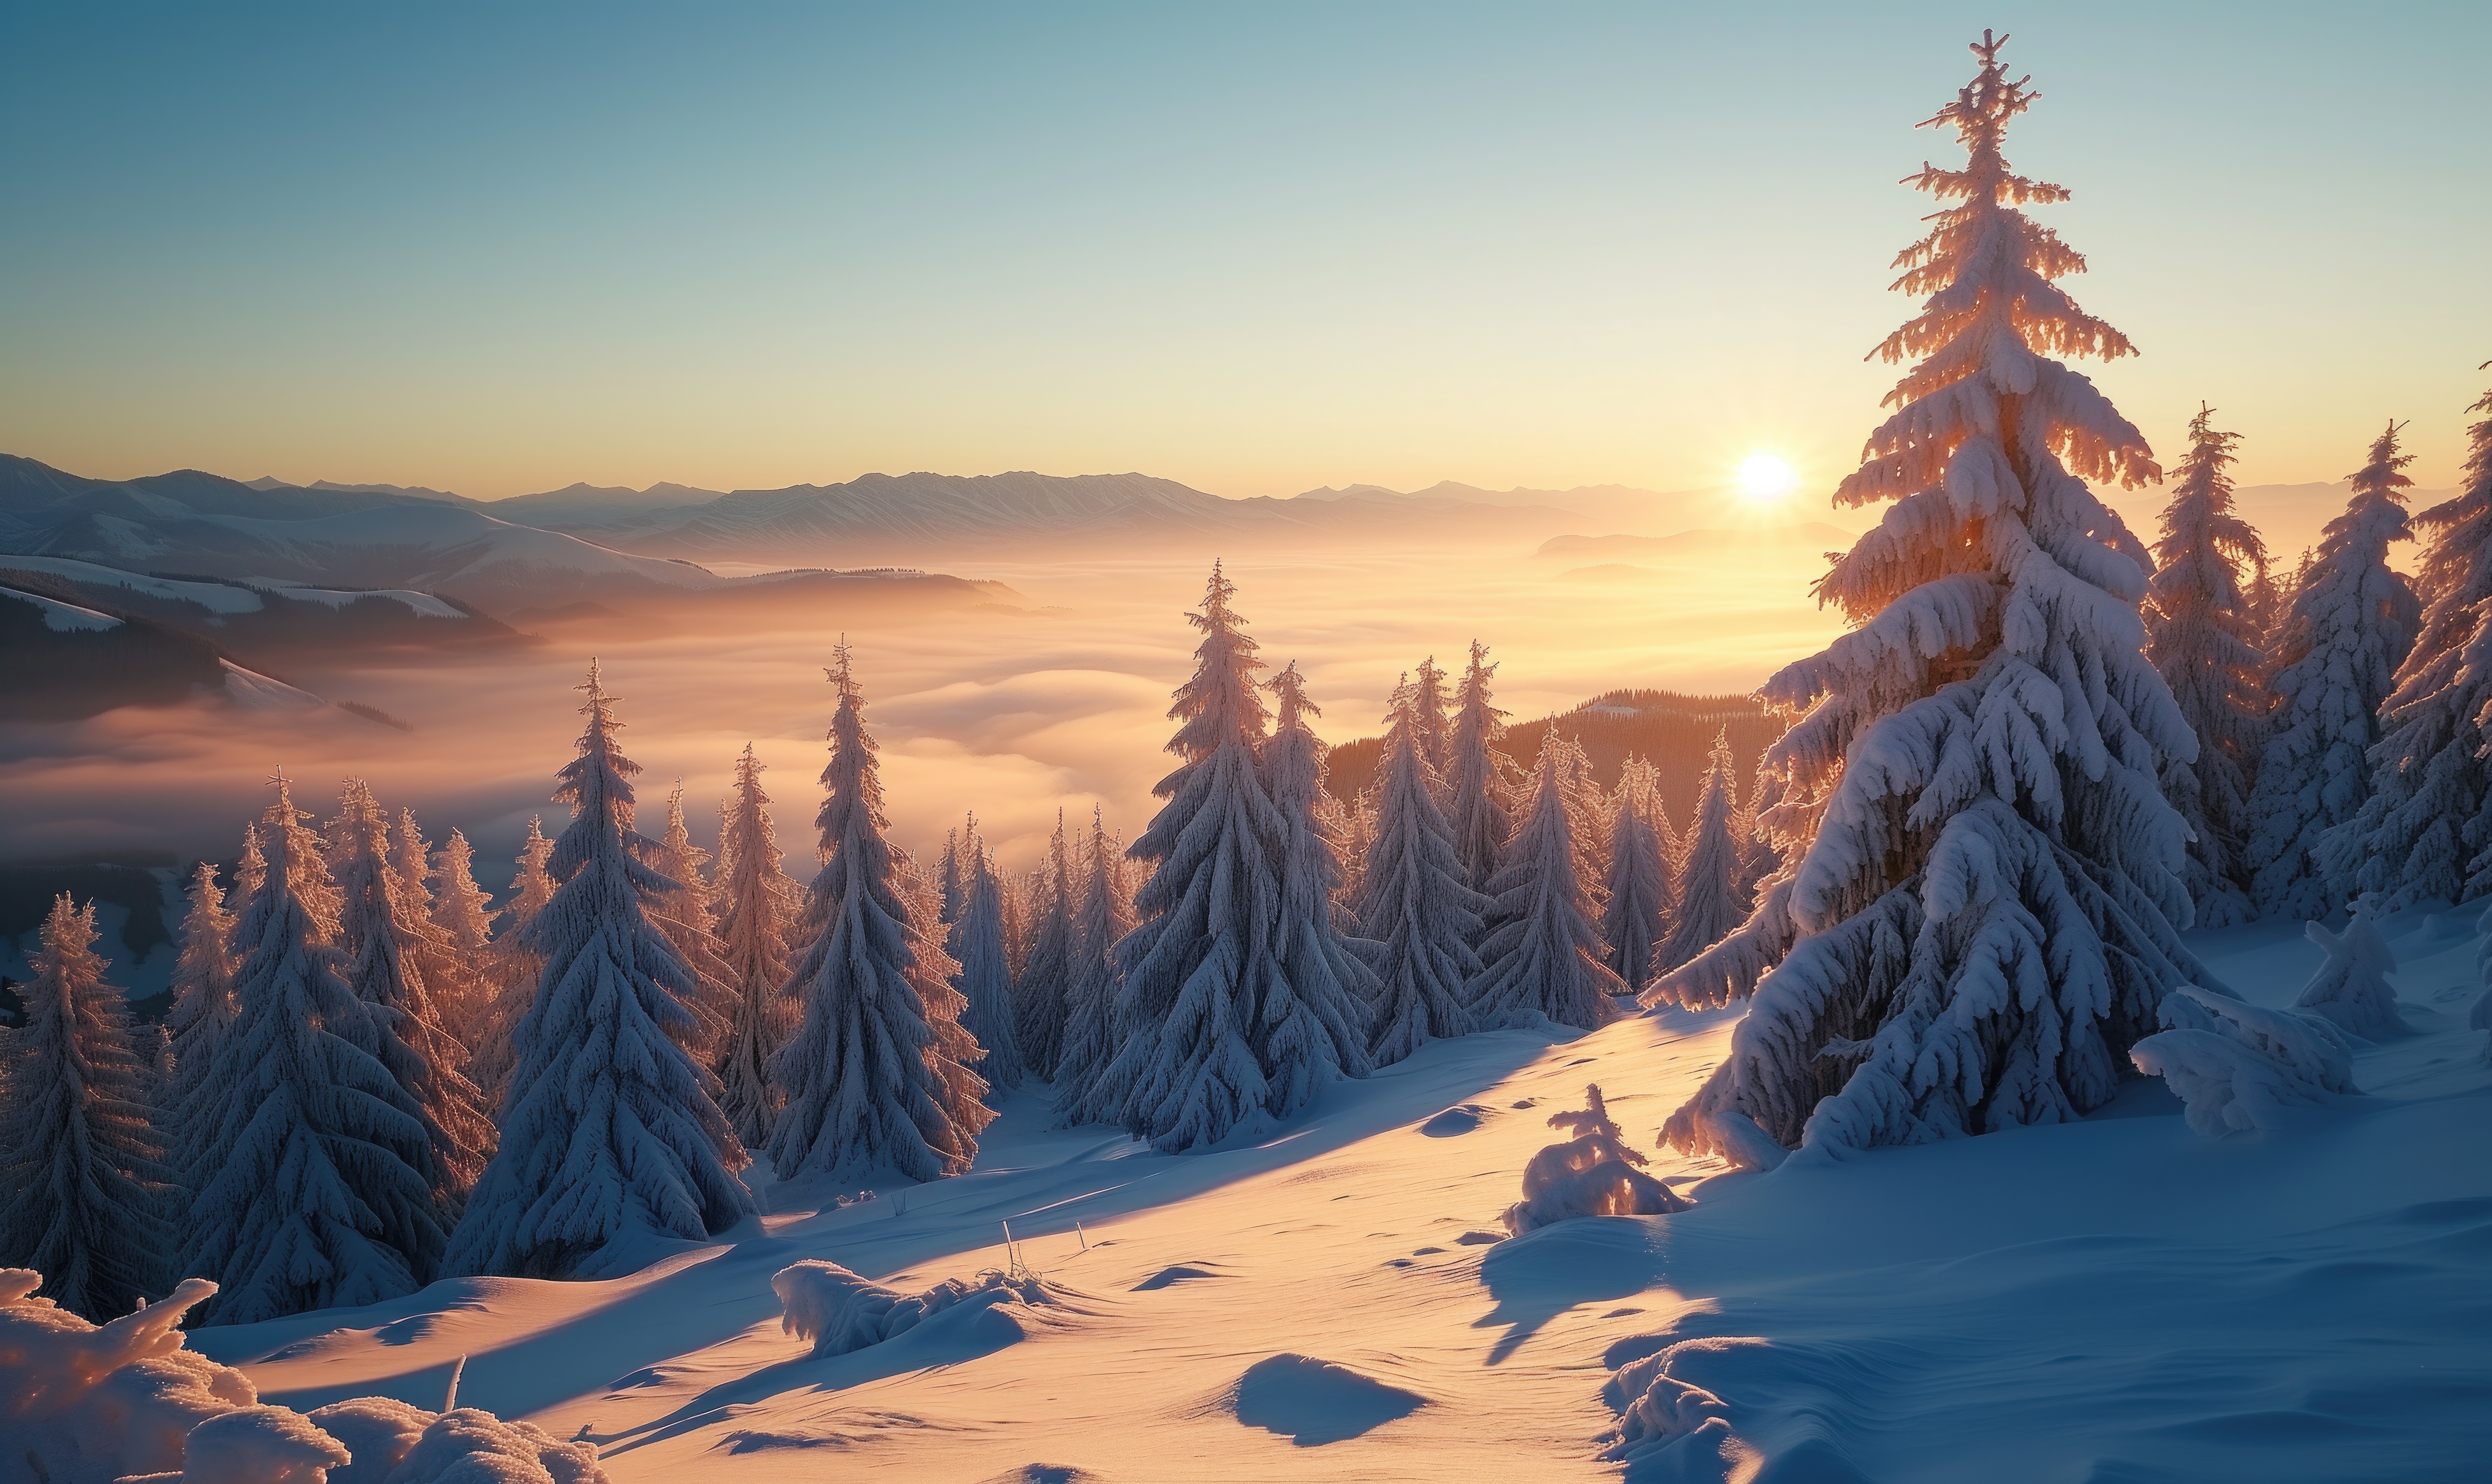 20+ Winter Scenery Free Photos and Images